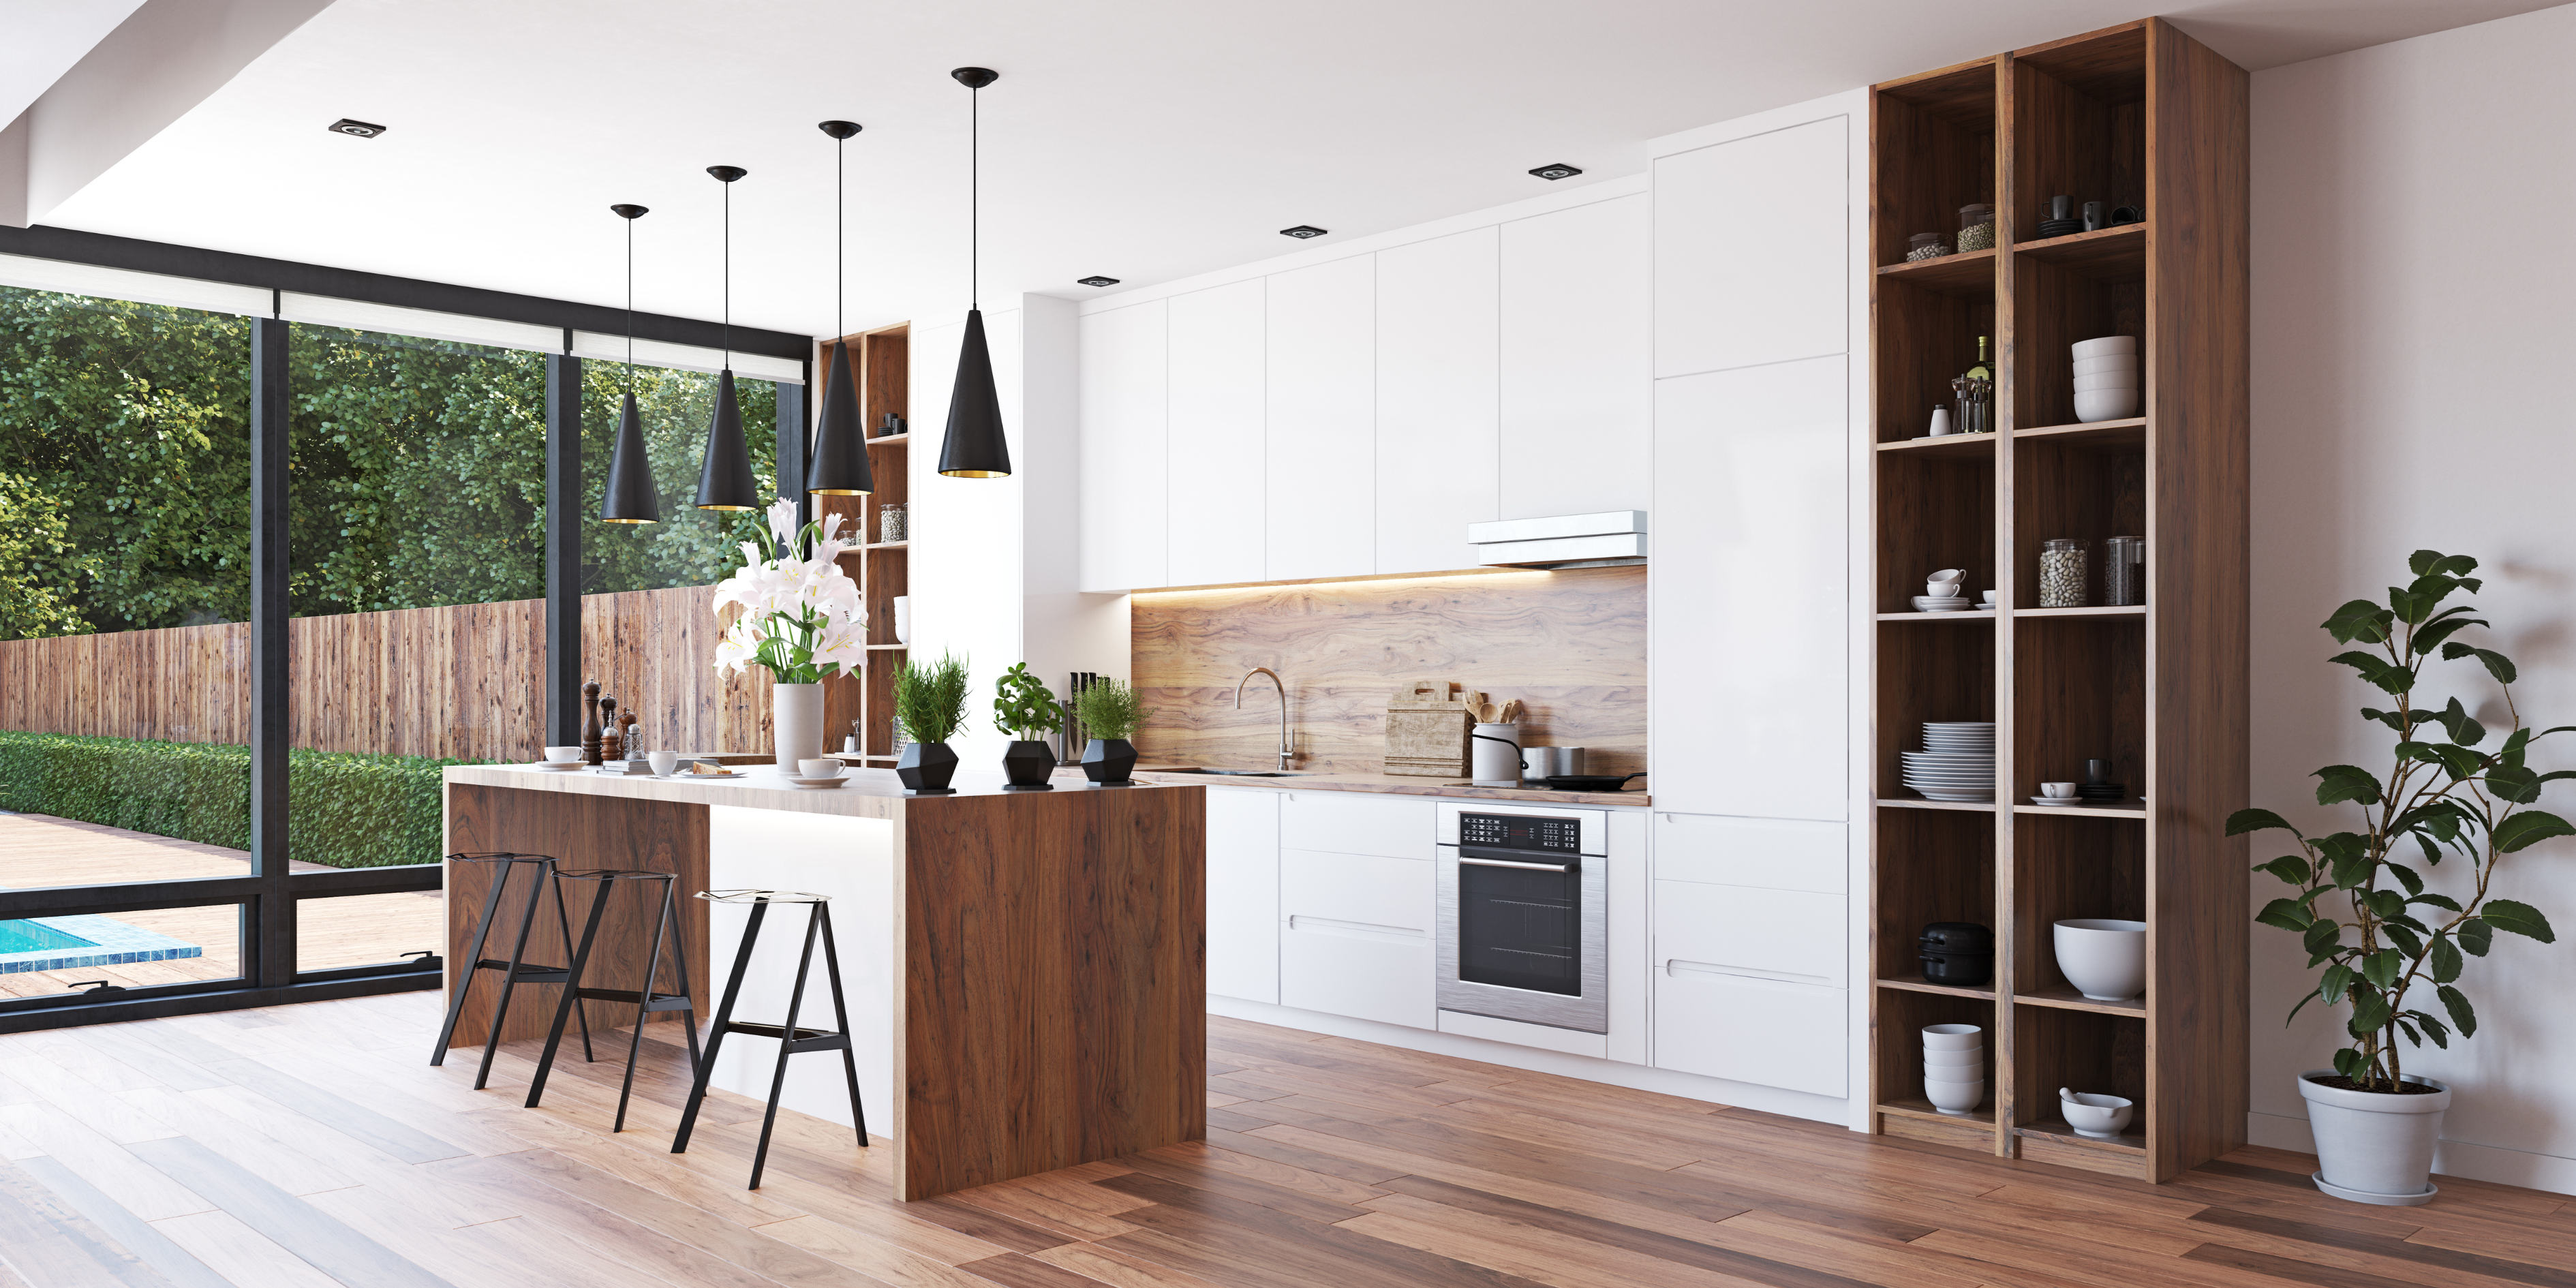 An open white and wood kitchen that is very modern in style.